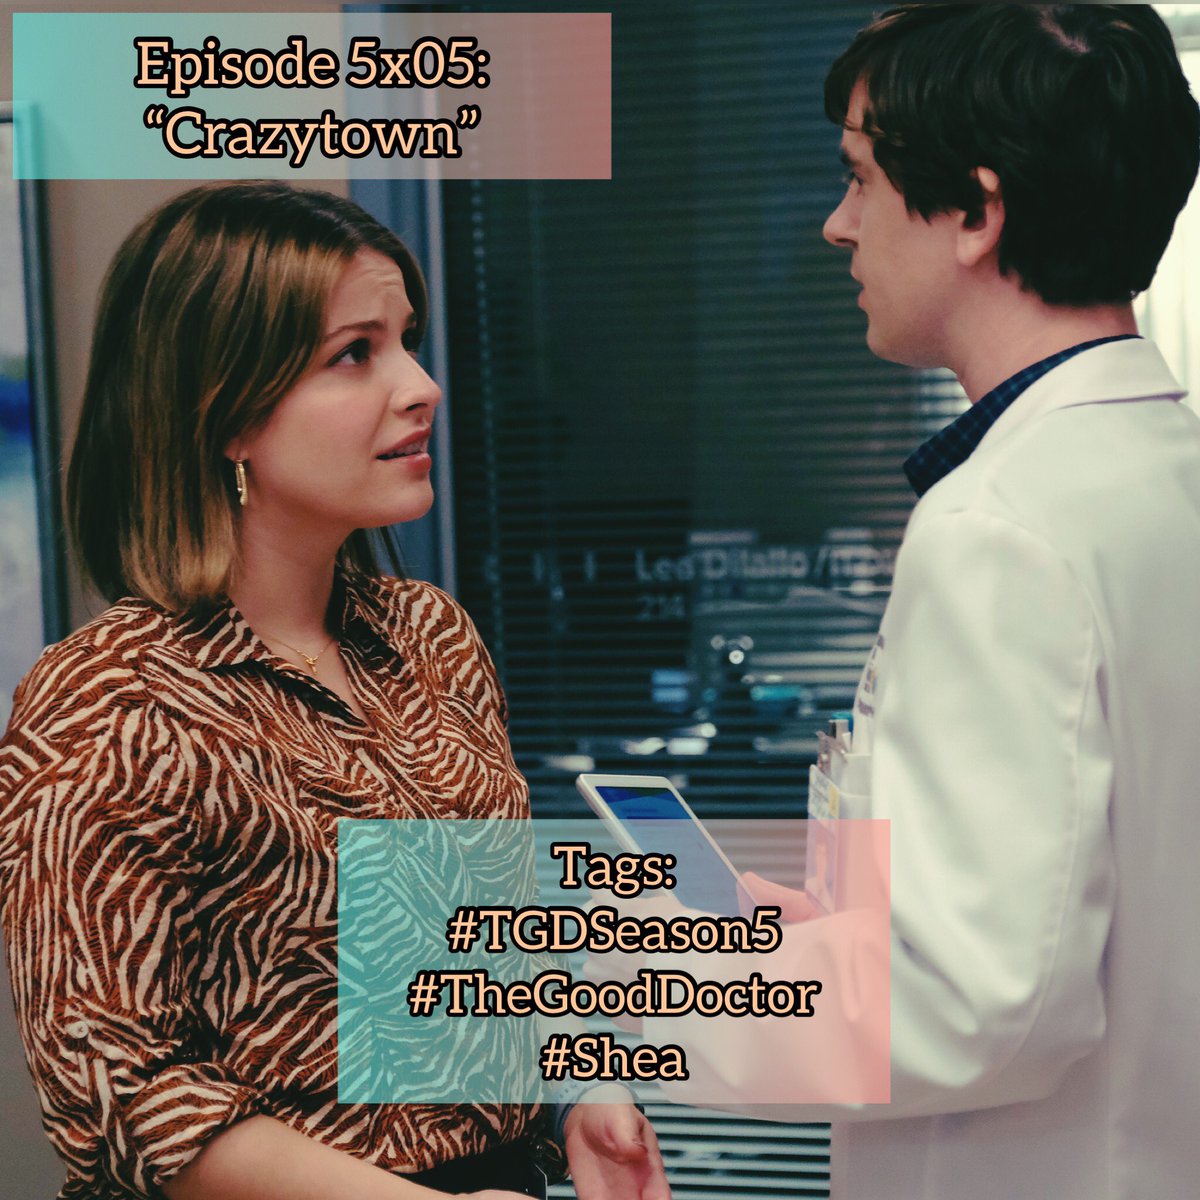 The Good Doctor today! And don’t forget to tweet live with us the episodio 505! Use the hashtags: #TheGoodDoctor #TGDSeason5 ❤️